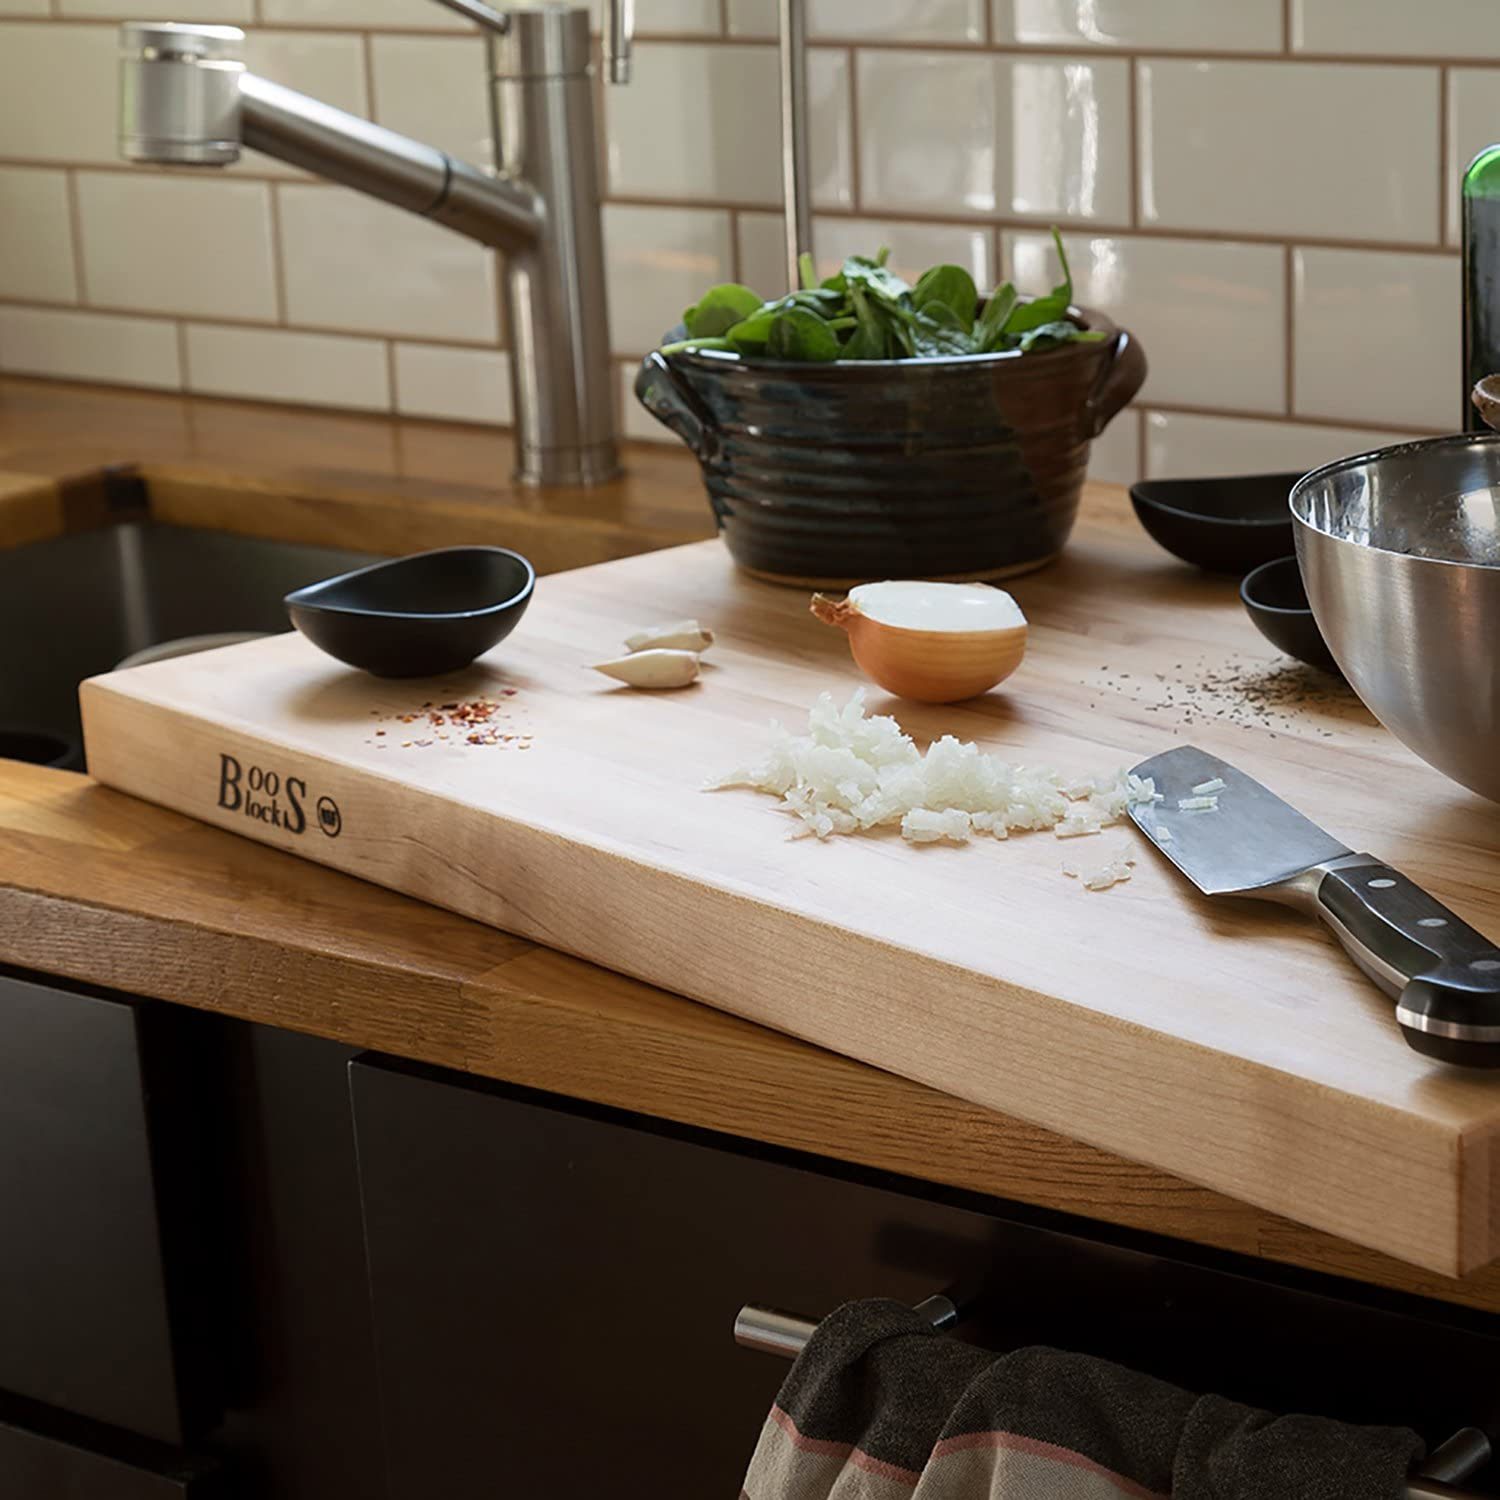 The Best Kitchen Gadgets, According to the Professionals